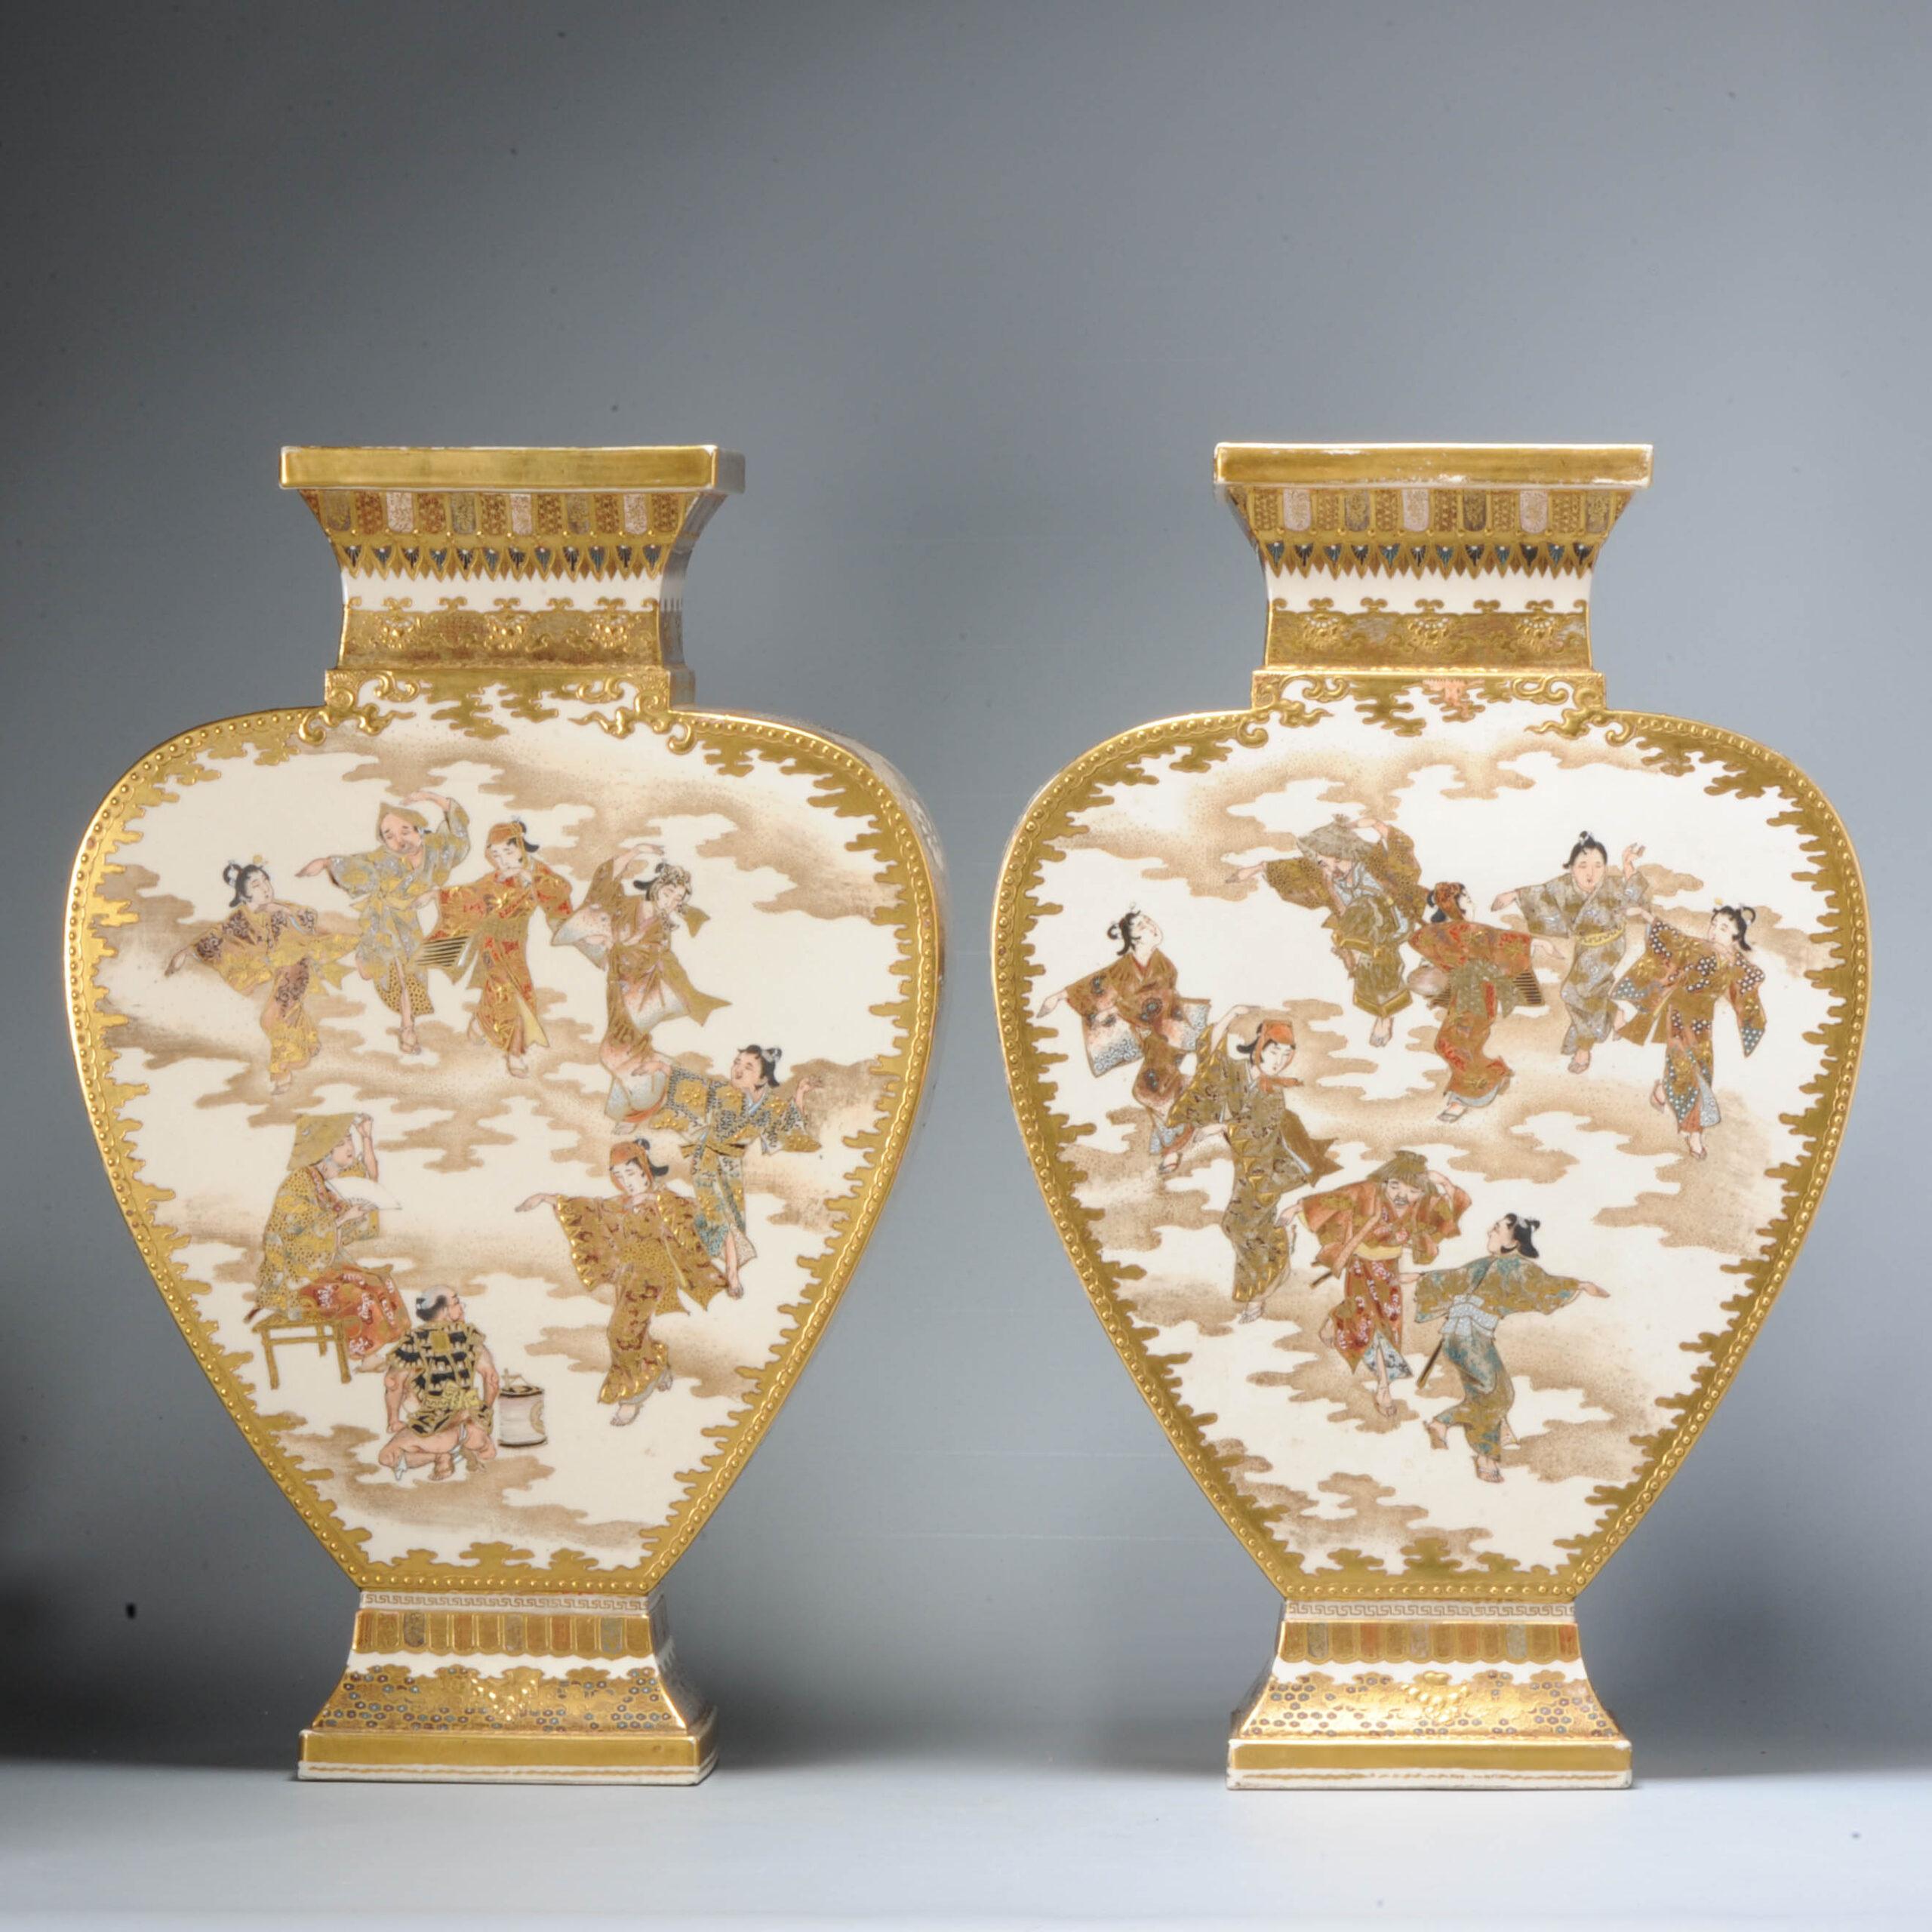 Pair of Antique Meiji Japanese Satsuma Heart Shaped Vases Sotheby's. 

They seem to be identical (but in mirror) but there are some nice differences. For example one has a tiger and one has a dragon. But also the dancers on 1 vase perform to a